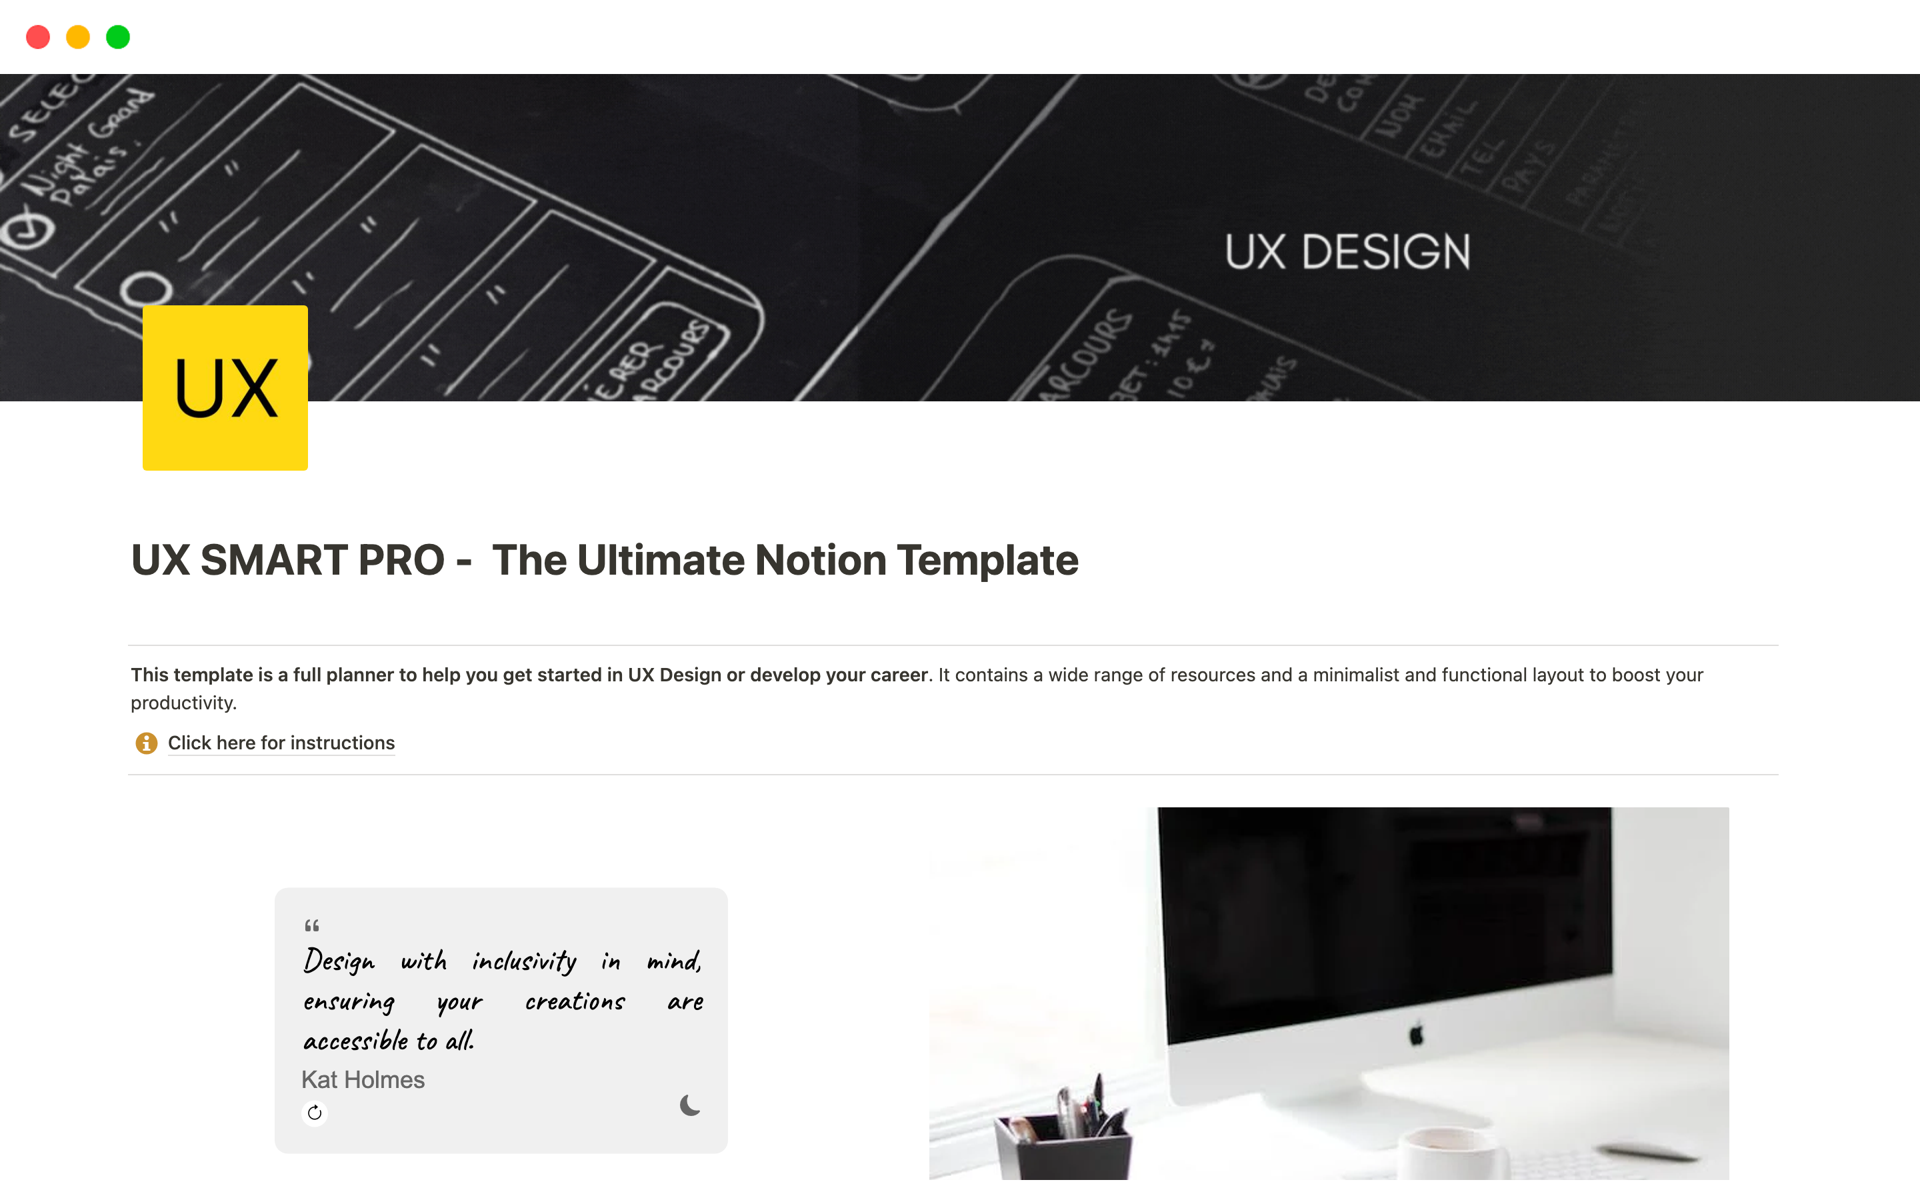 Designed specifically for UX Designers, this notion template presents a clear and organized structure that guides you through the UX Design Fundamentals you must learn and helps you get inspiration and manage your design projects.